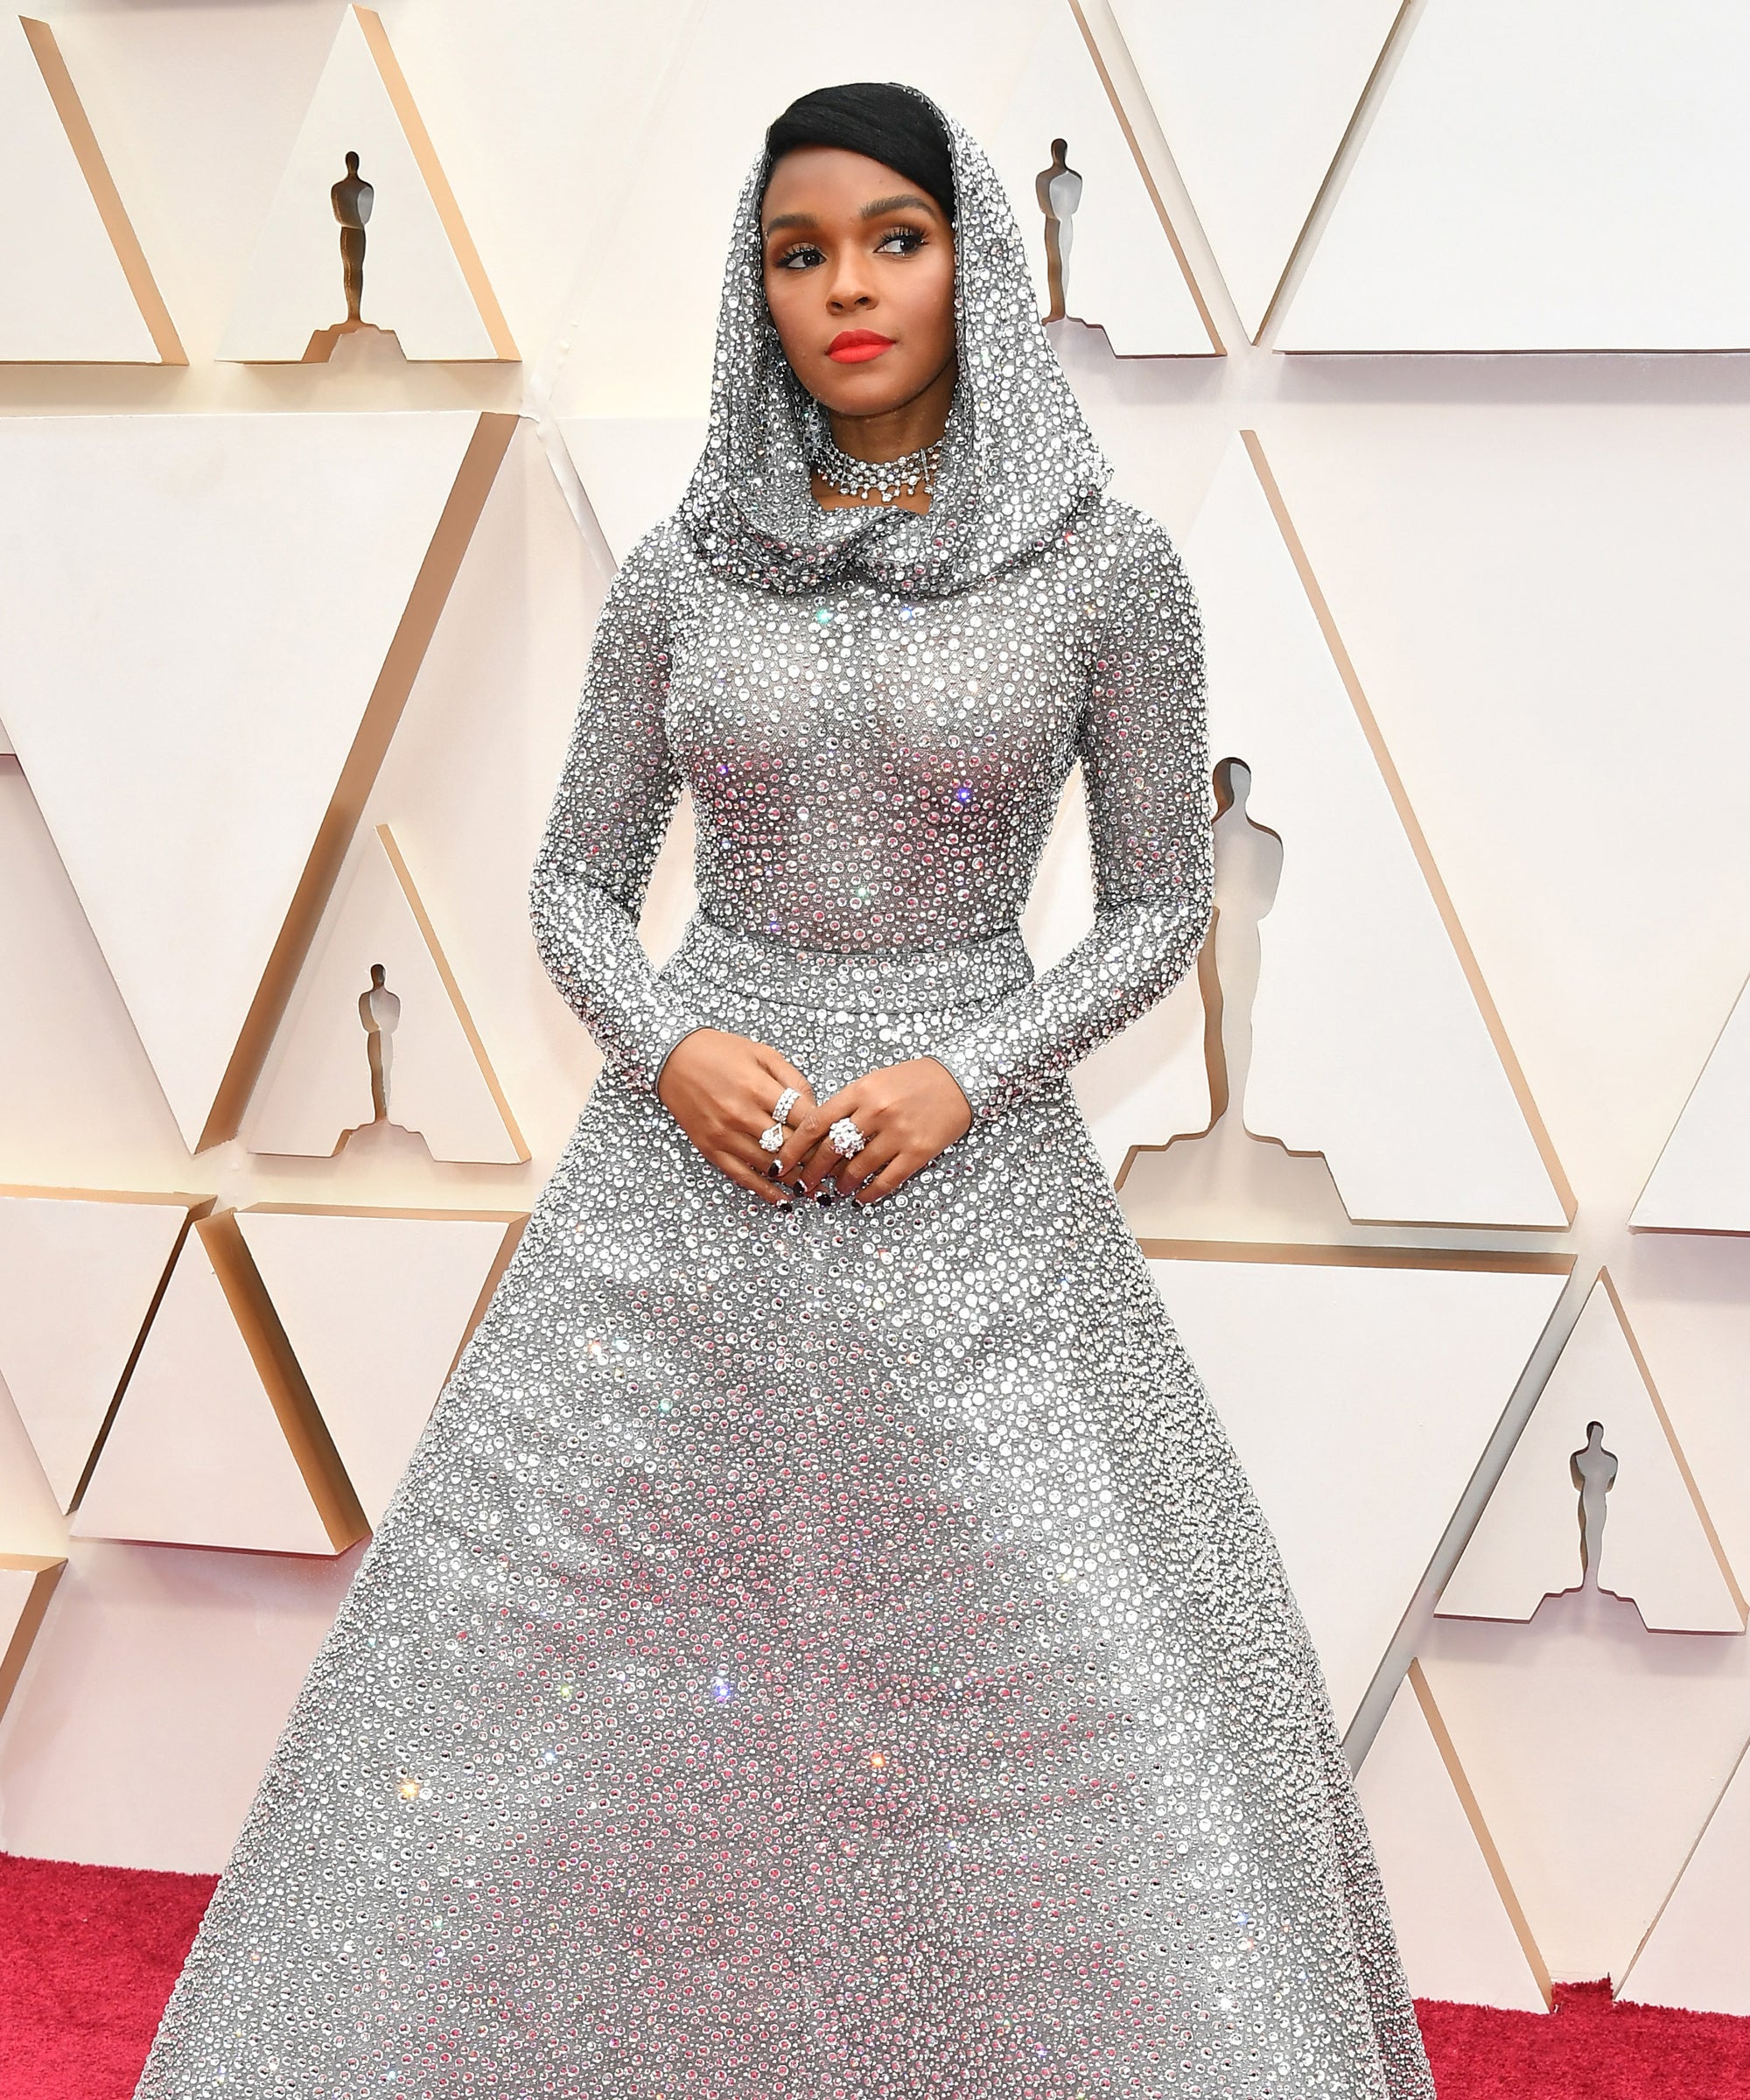 Janelle Monae Stuns In Oscars Hooded Dress With A Twist